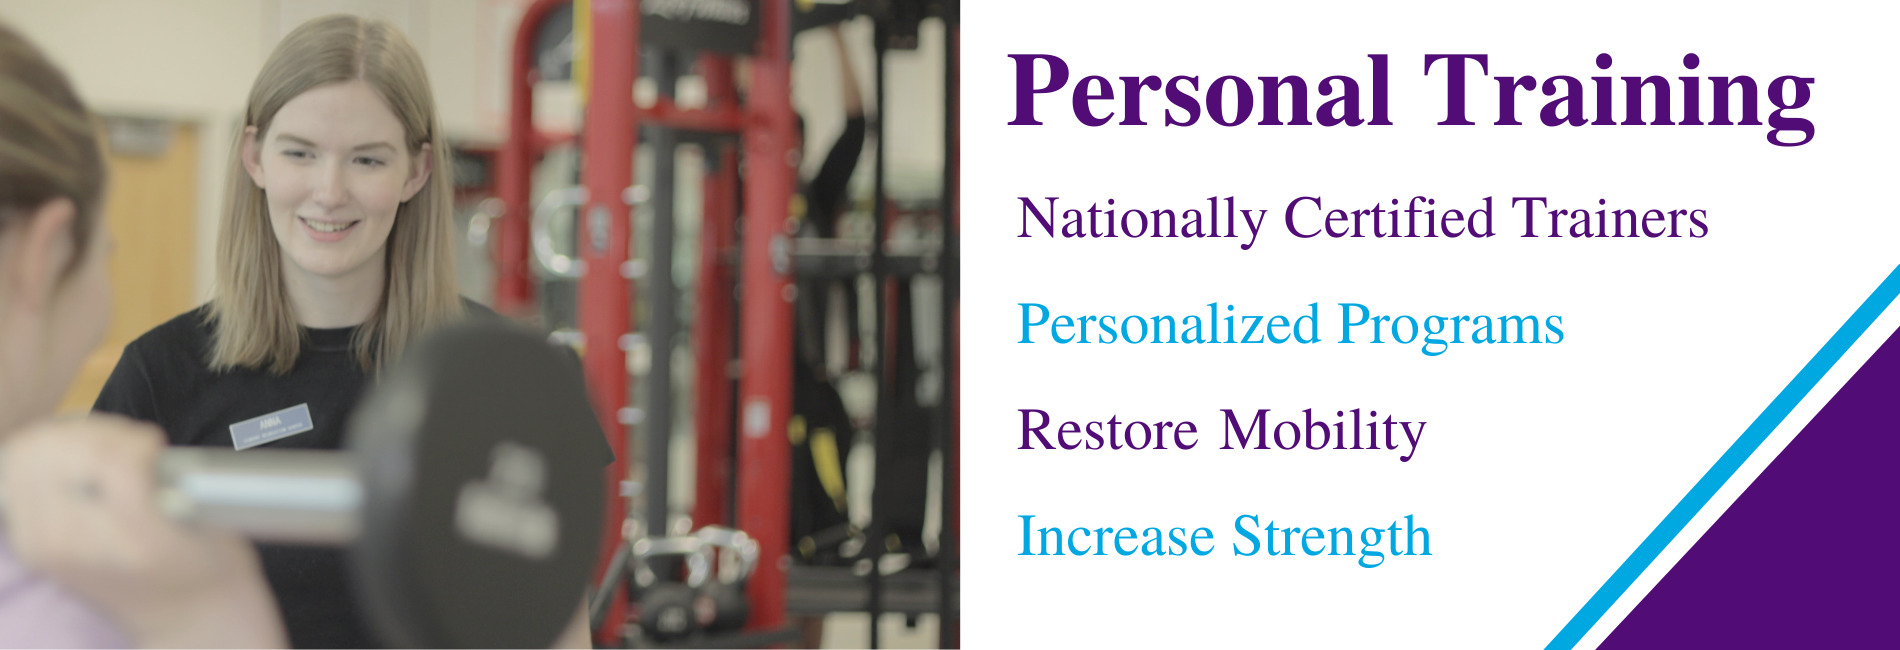 Personal Training Nationally Certified Trainers